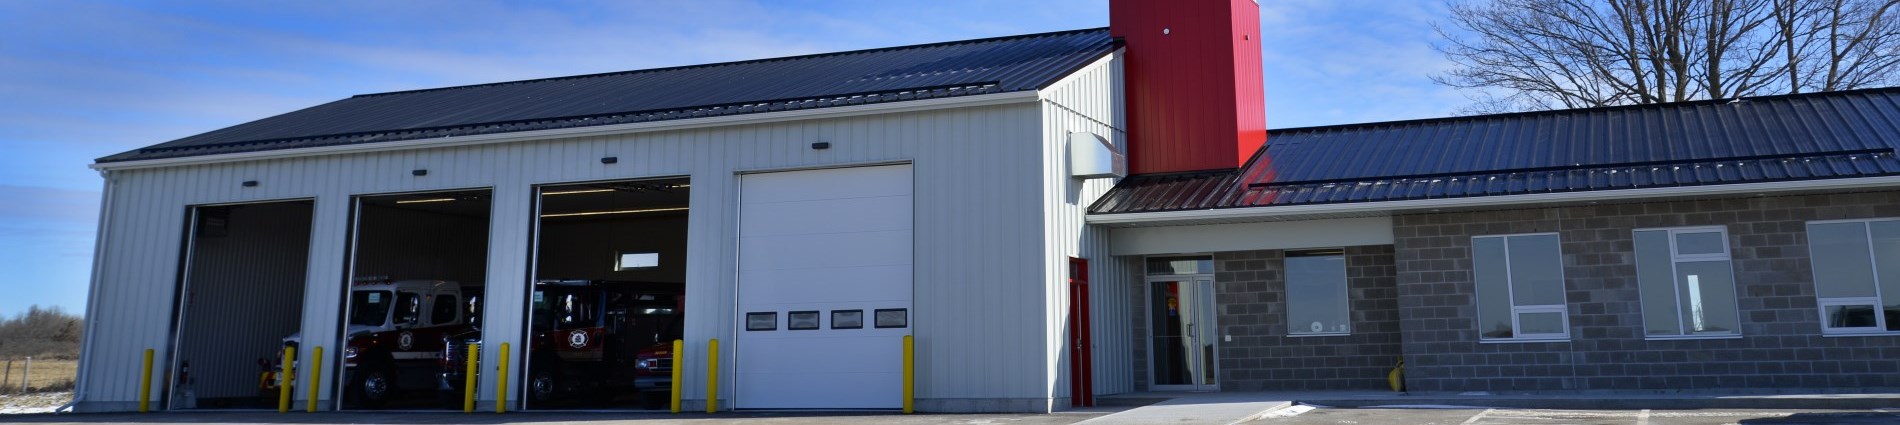 Picture of a fire station